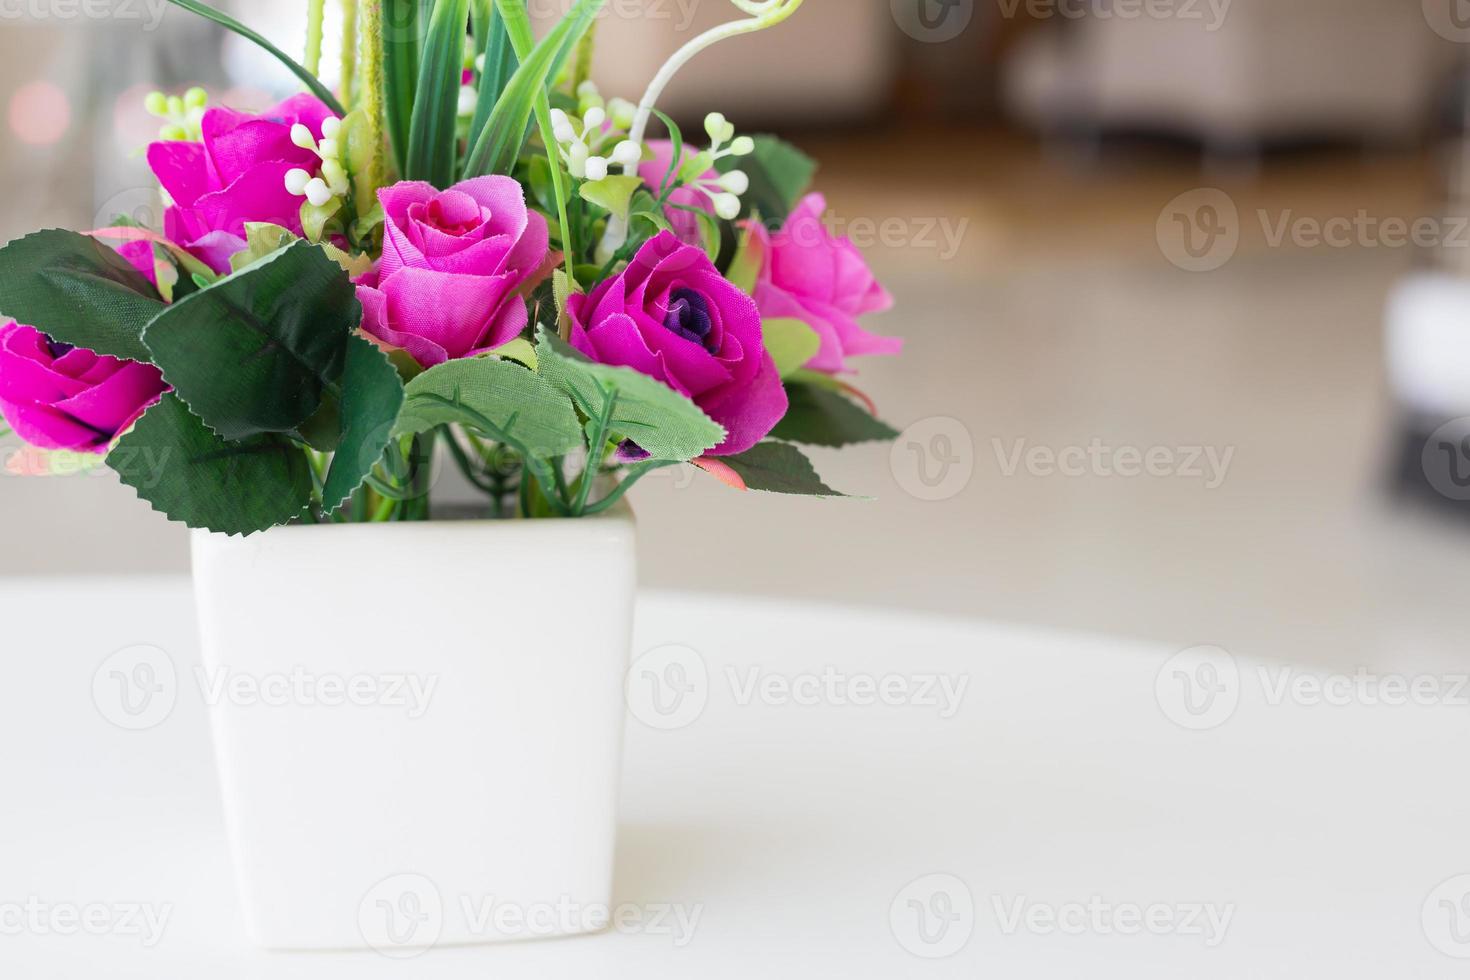 Vases artificial flowers photo